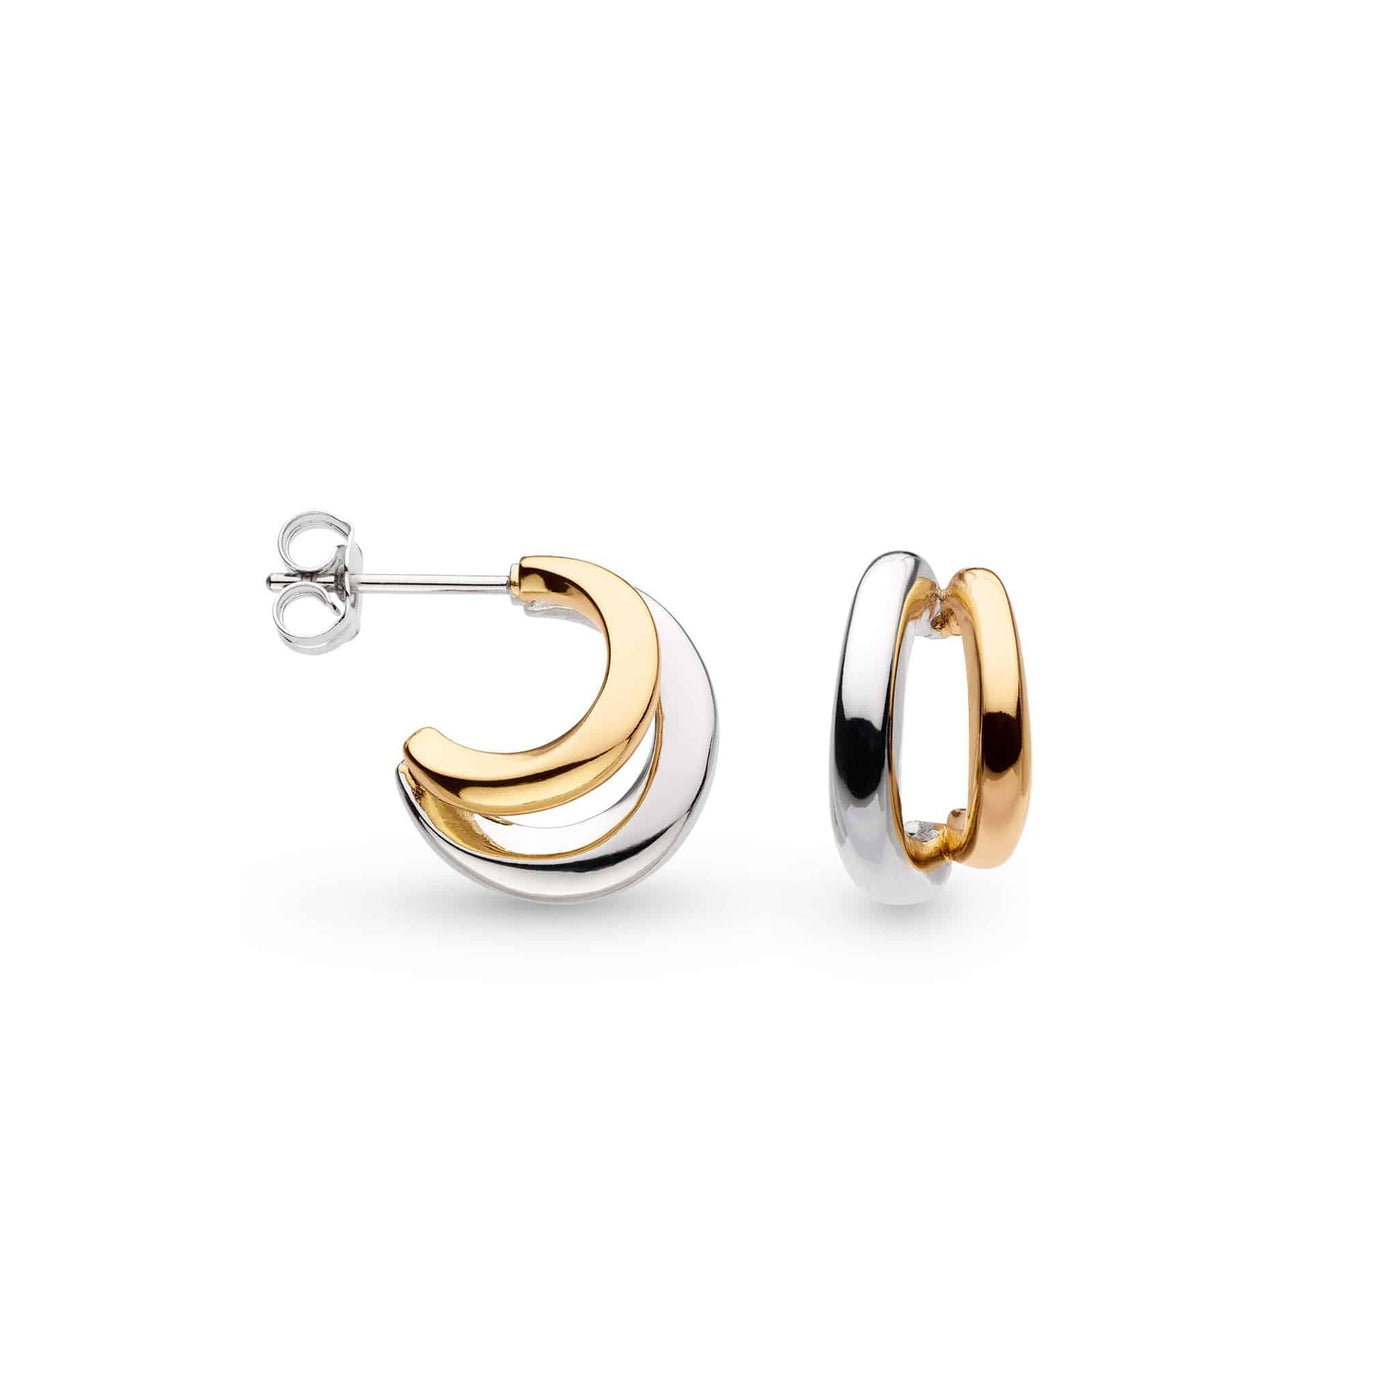 Kit Heath 18ct Gold Vermeil and Silver Bevel Cirque Link Twin Hoop Earrings - Rococo Jewellery